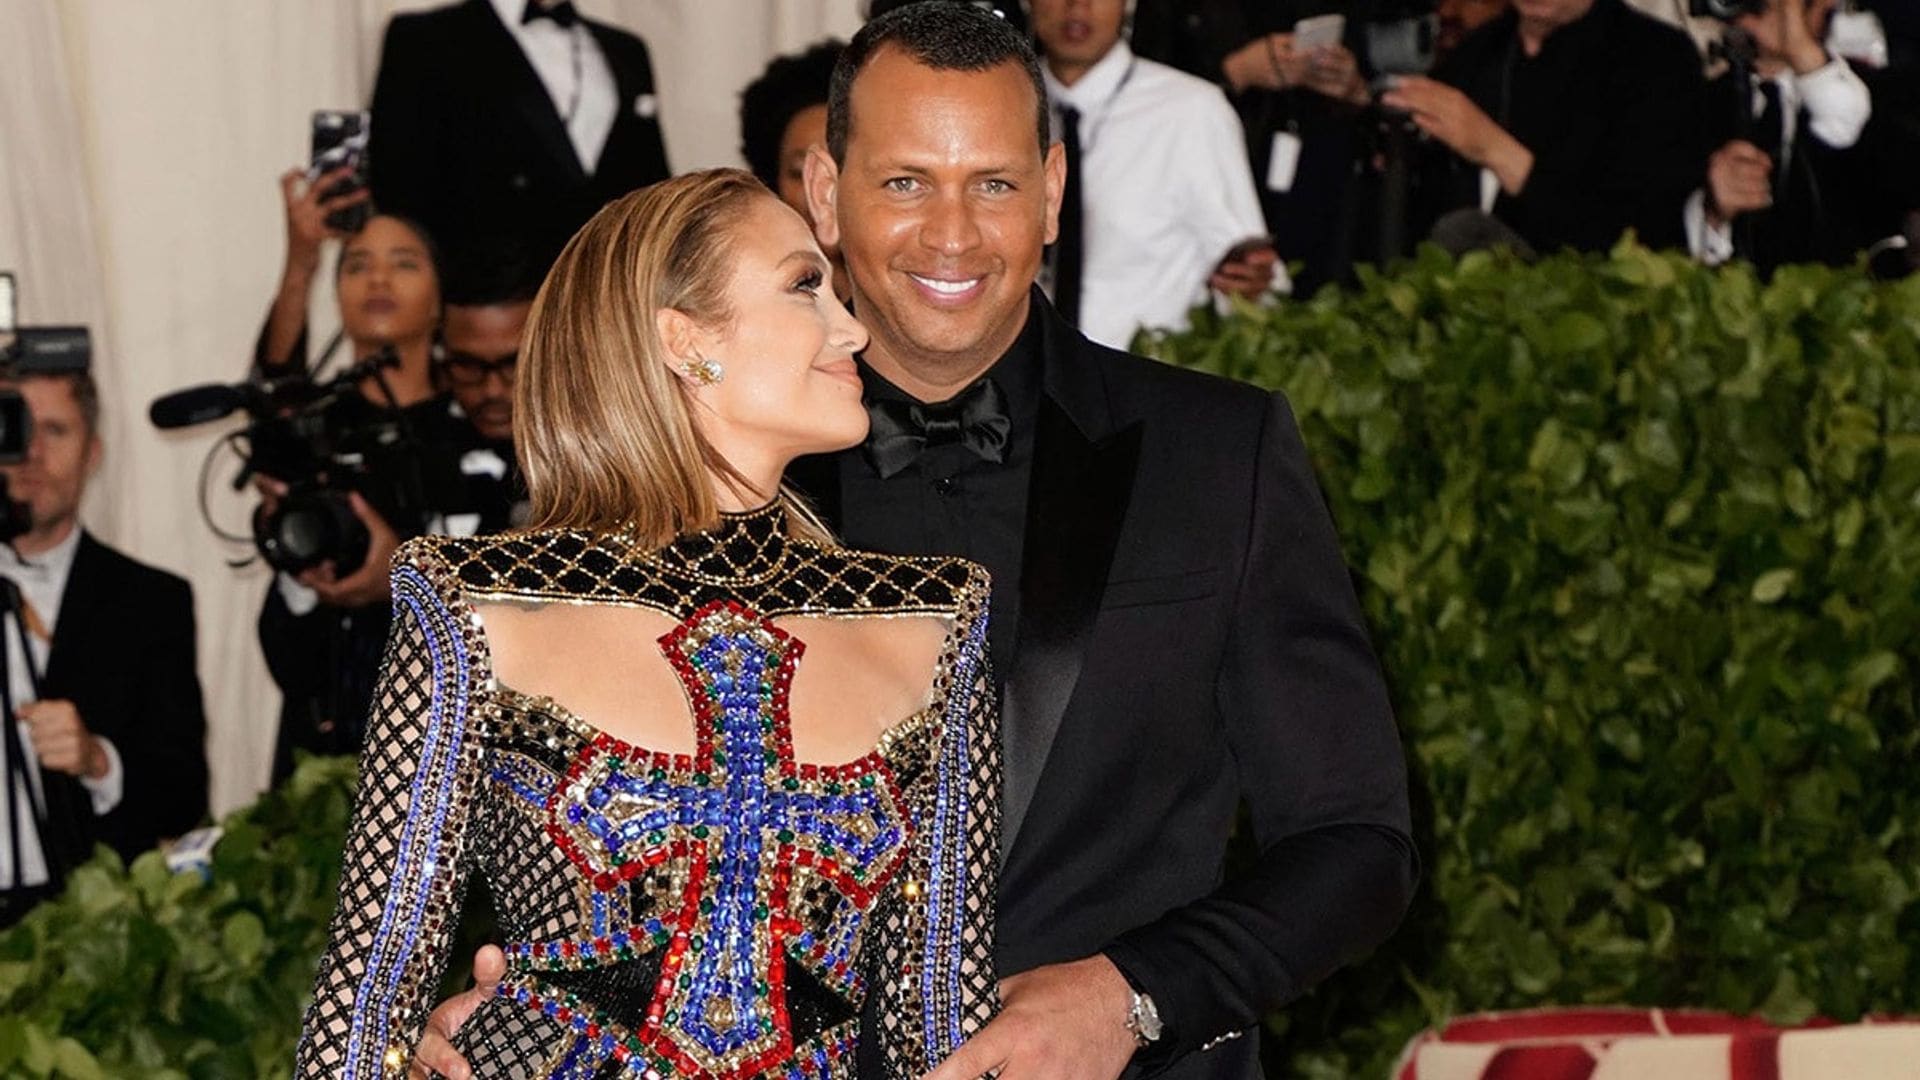 Everything you need to know about JLo and A-Rod's relationship in 30 seconds